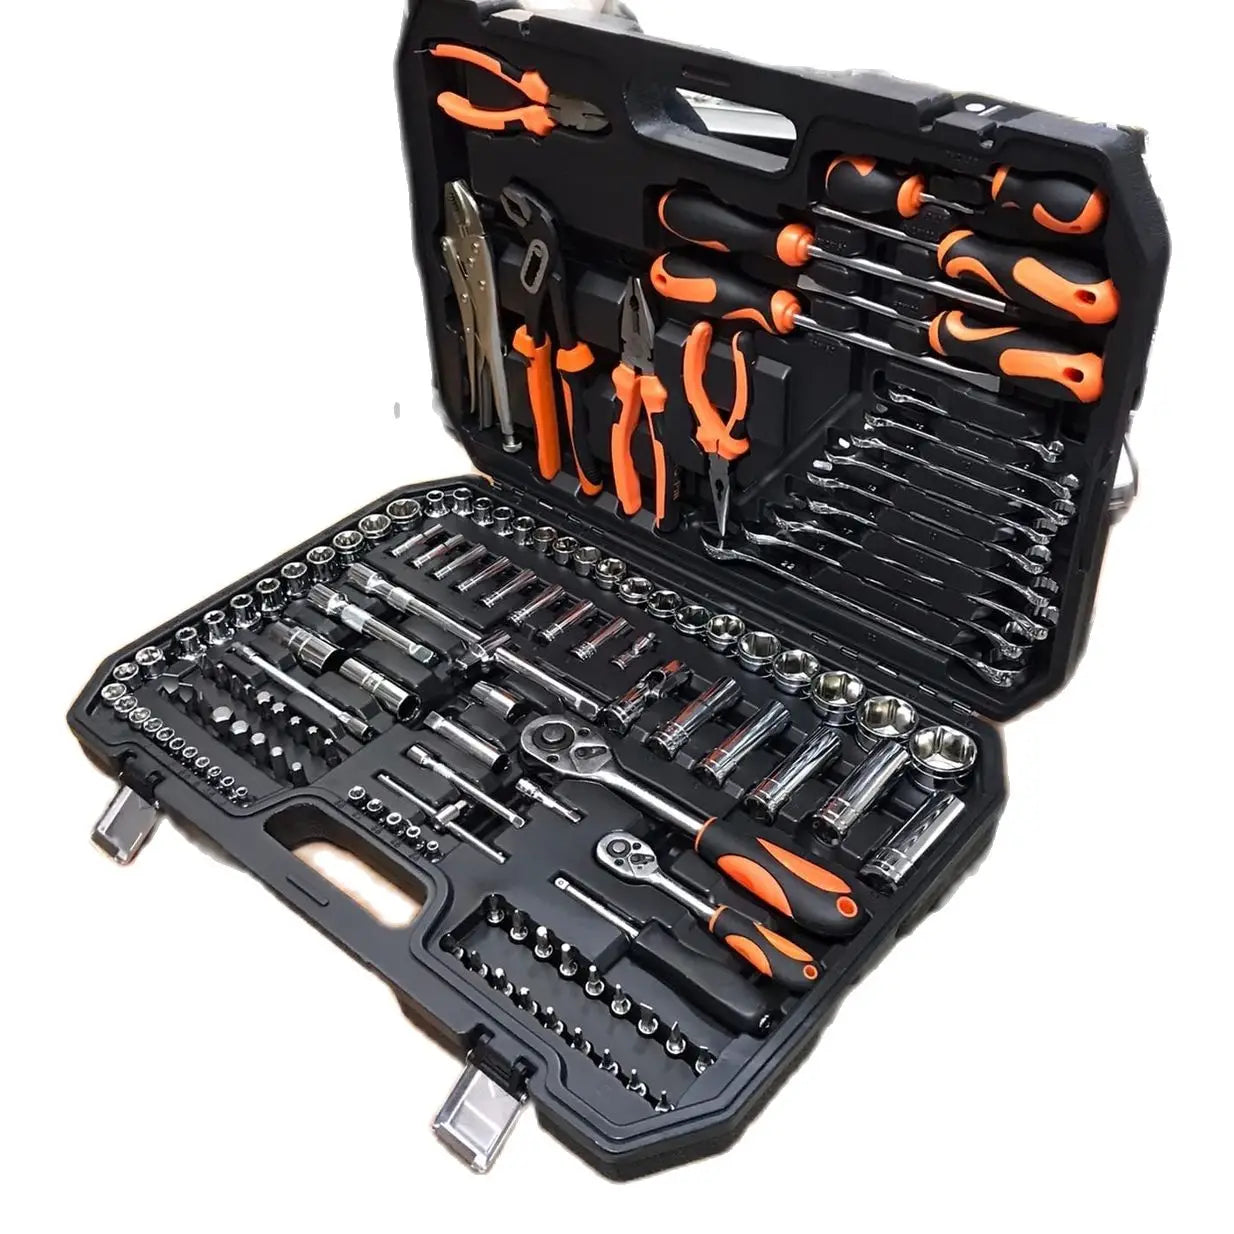 Tool kit 131 CR-V object High quality, universal for car and home, plumbing kits sets of hand tools